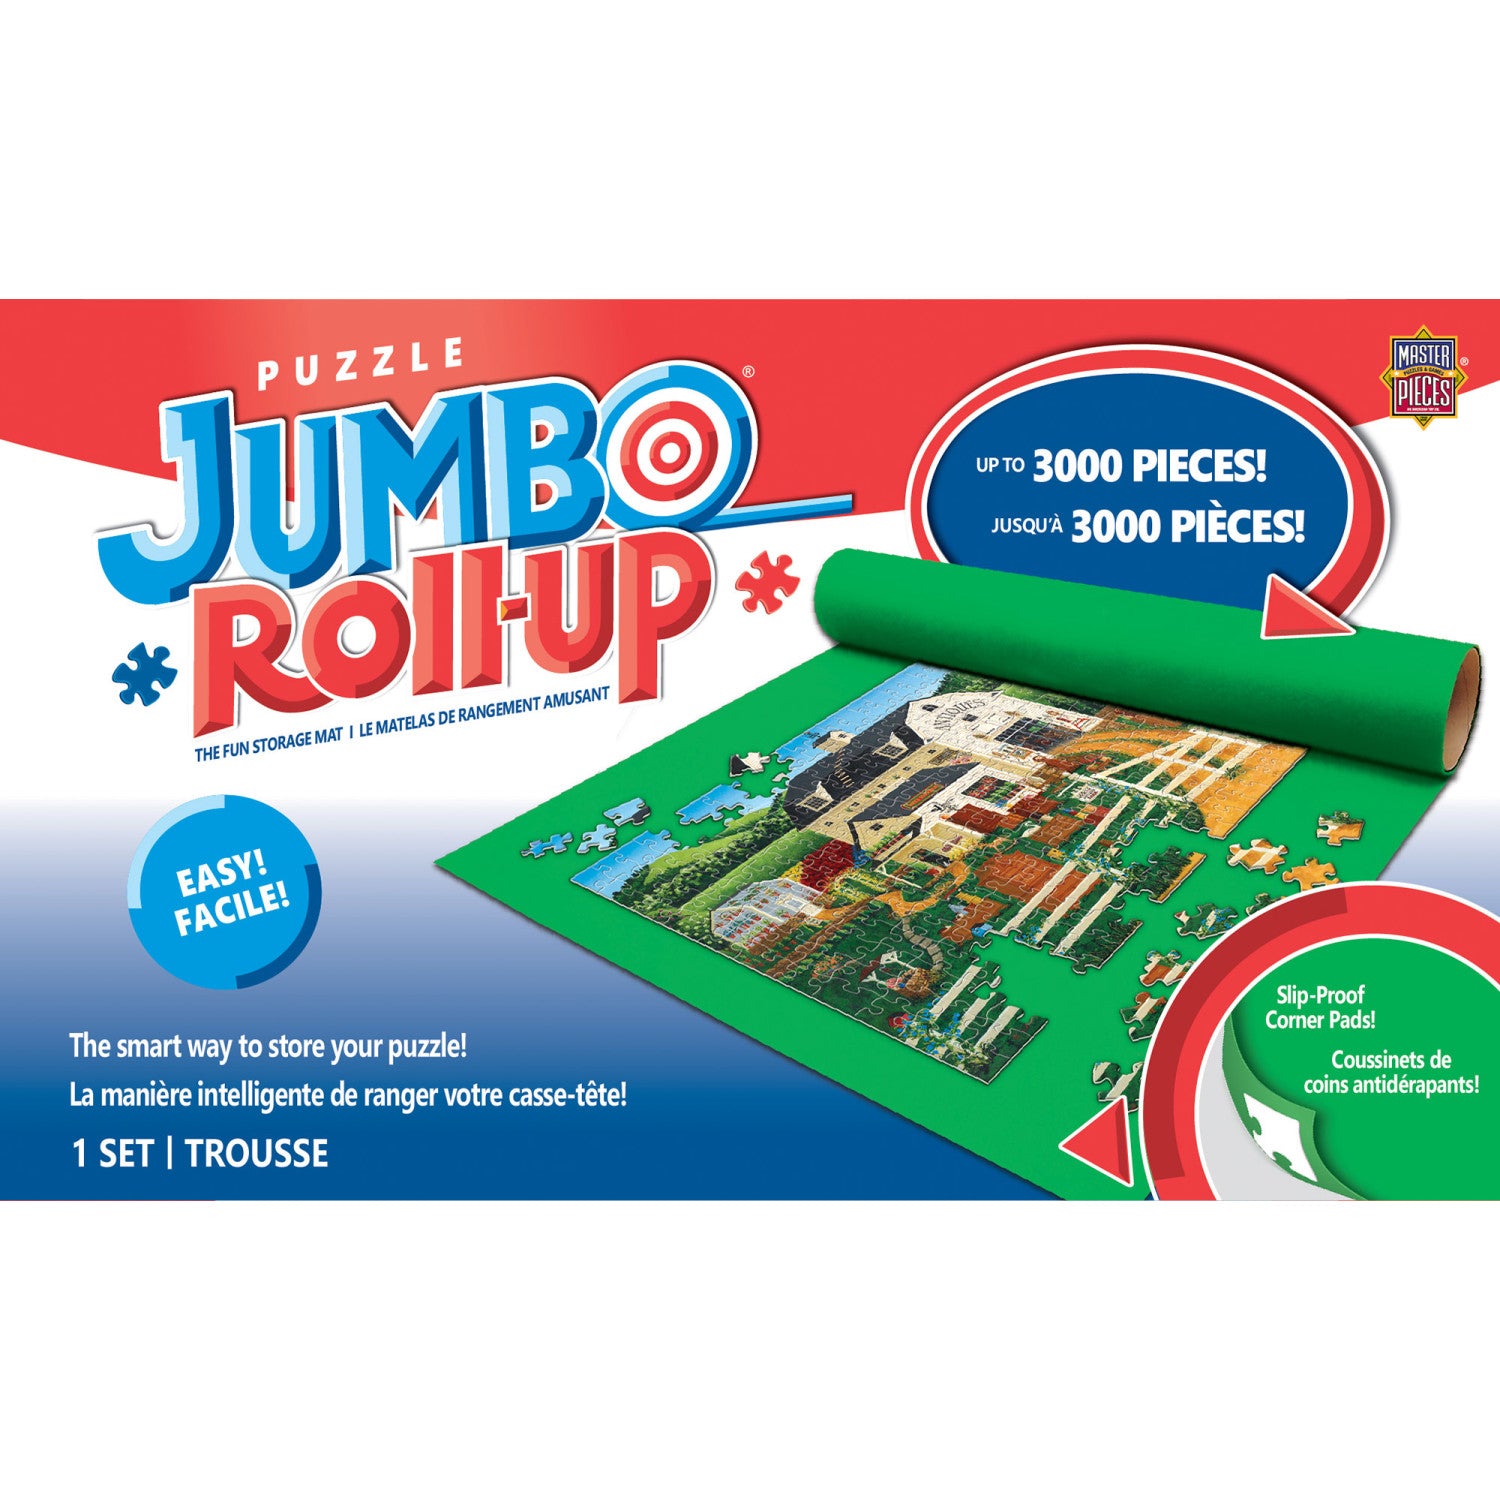 Puzzle Keeper Jumbo Roll Up Mat for 1500+ Piece Puzzles, 36”x48